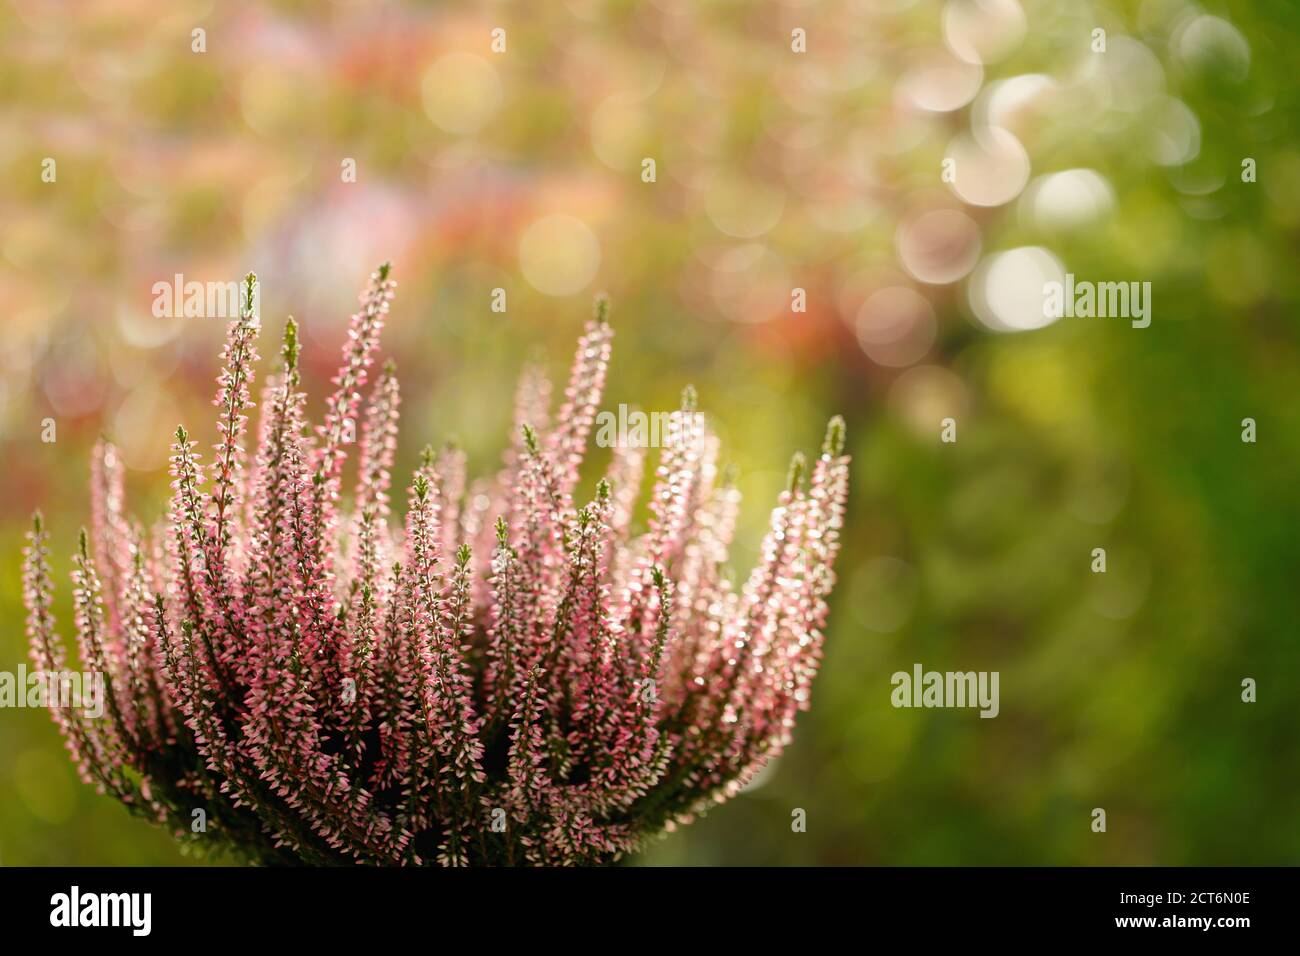 A heather plant against a decorative blurred background Stock Photo